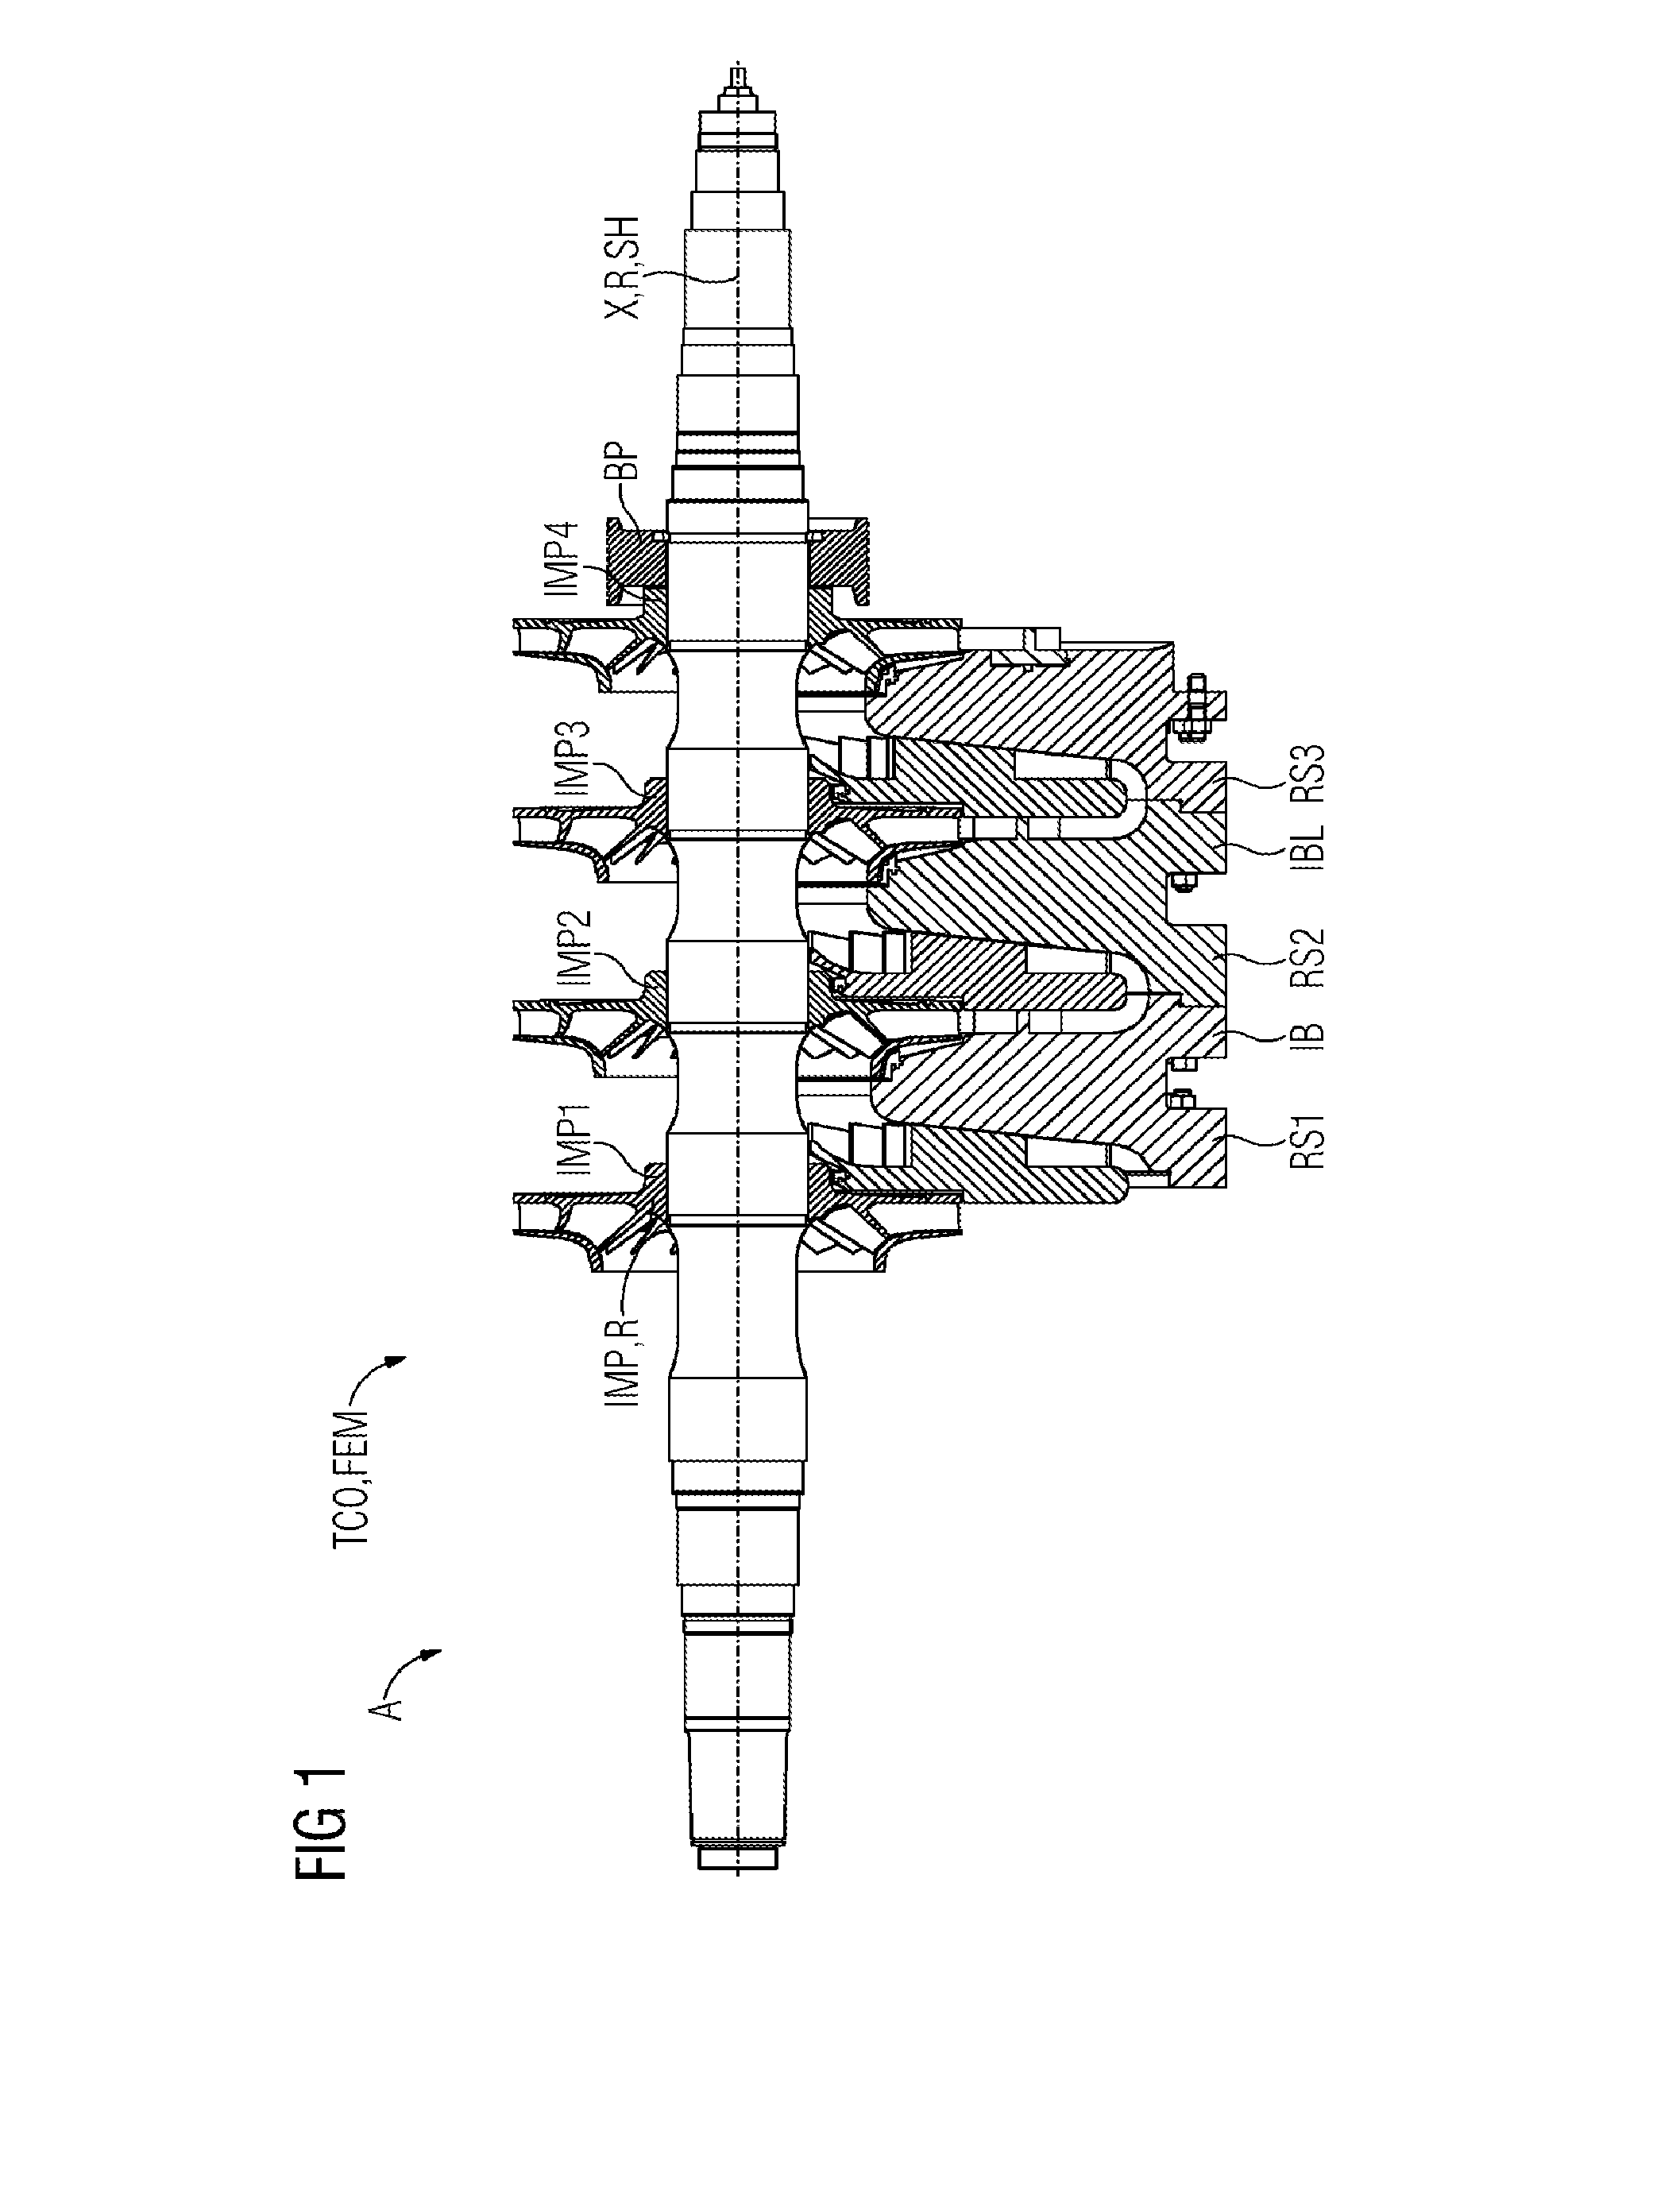 Arrangement of components in a fluid energy machine and assembly method